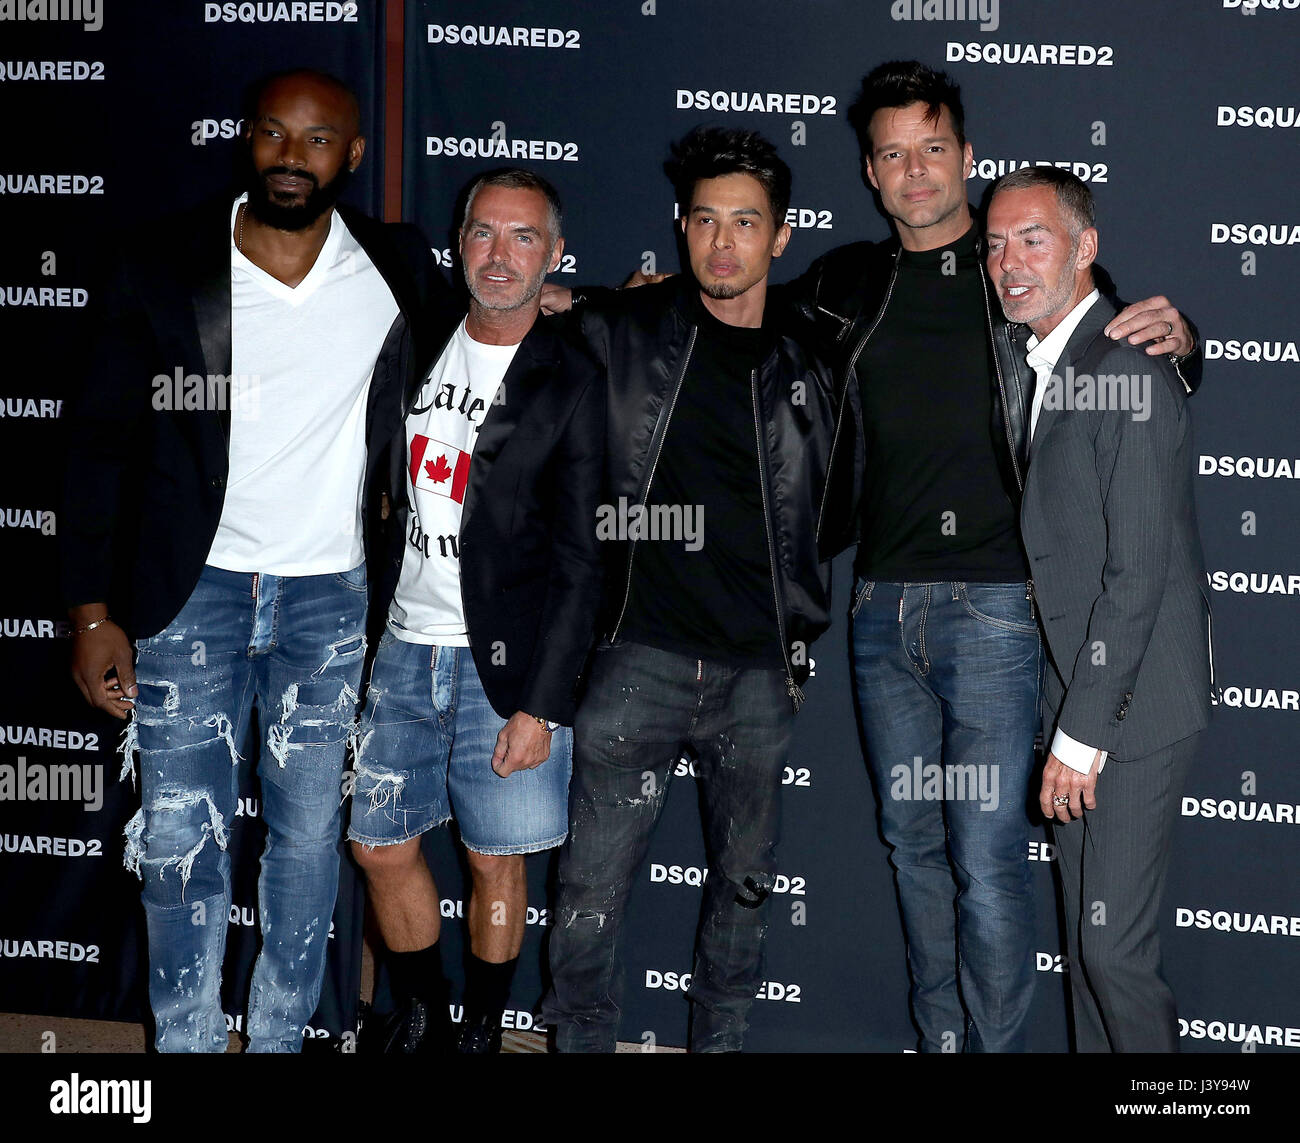 dsquared jeans celebrities